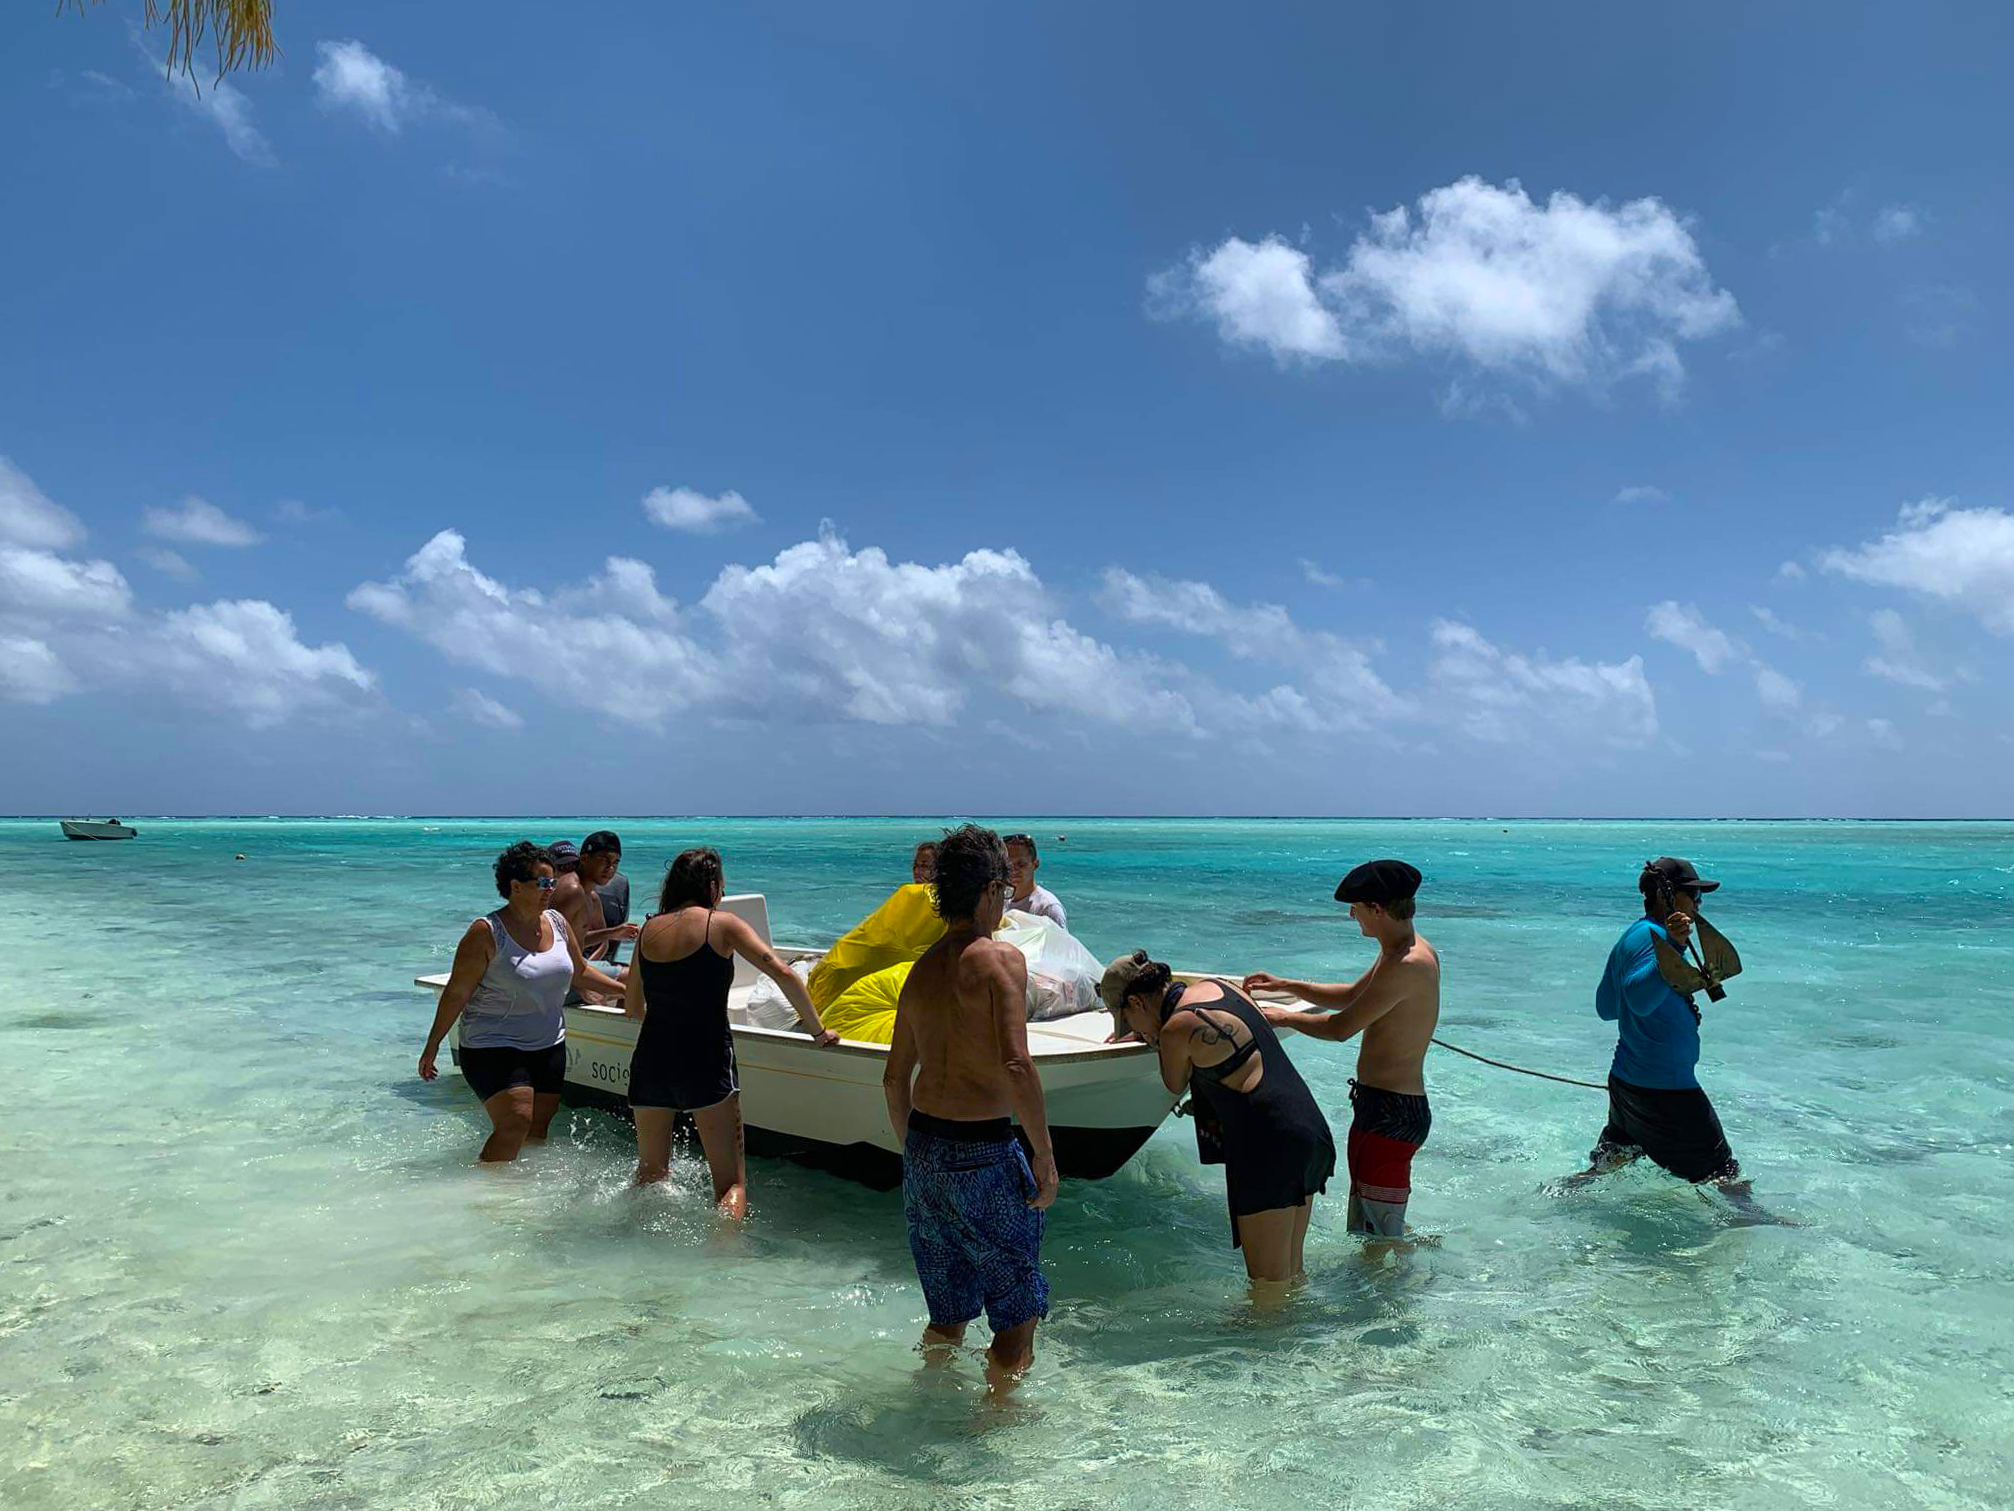 ten people standing around a boat in shallow water